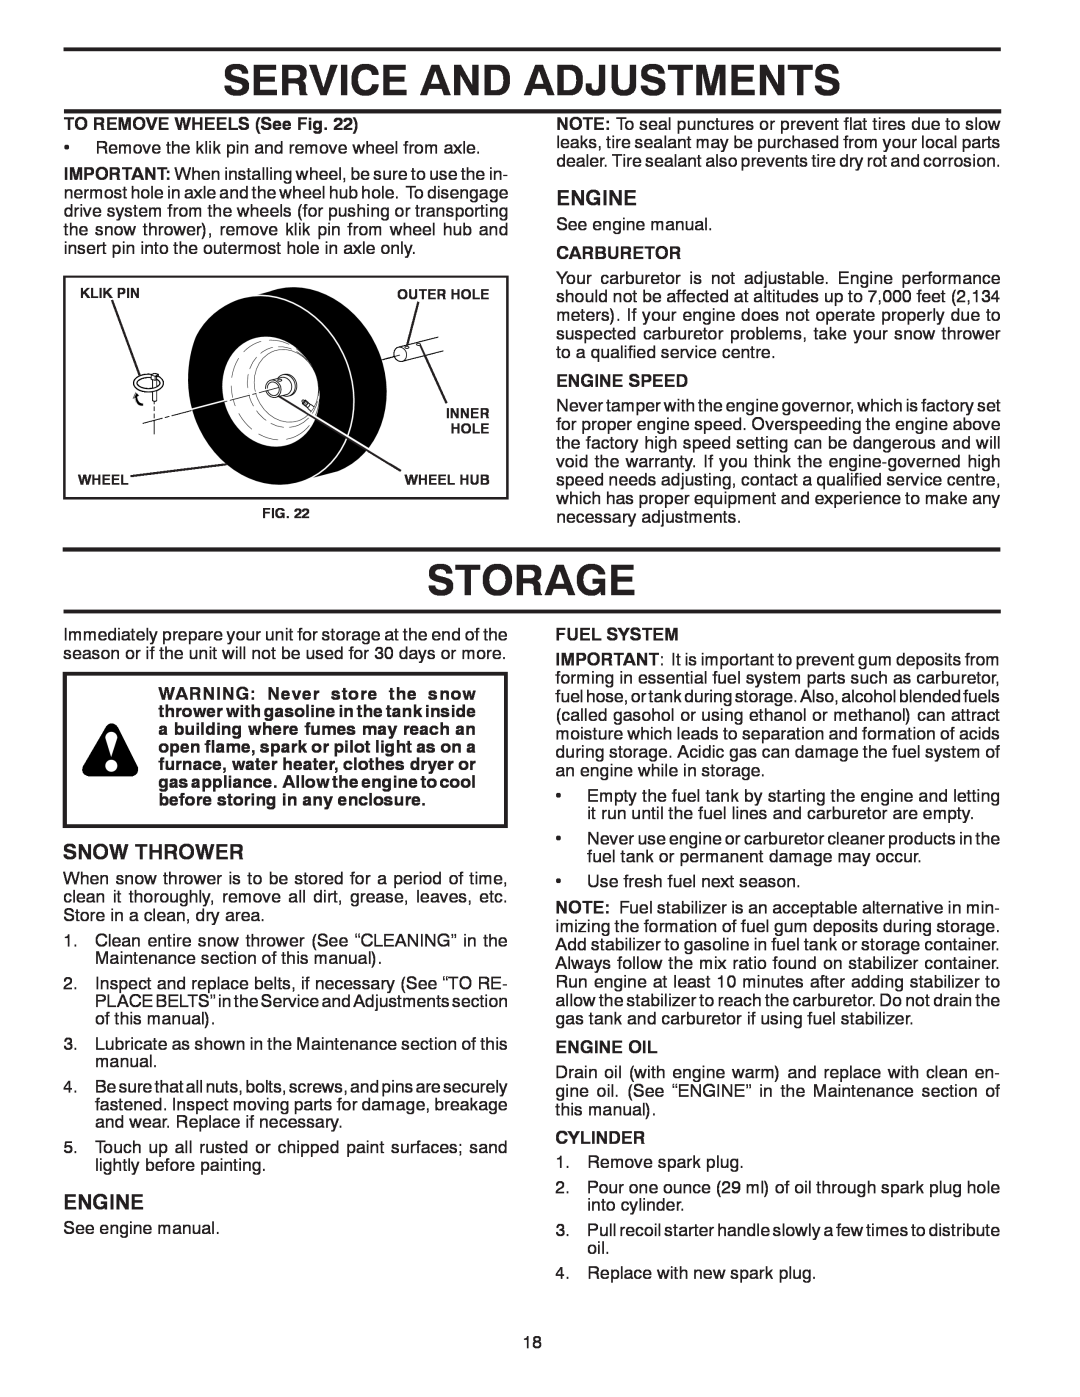 Poulan 418971 Storage, Service And Adjustments, Snow Thrower, TO REMOVE WHEELS See Fig, Carburetor, Engine Speed 